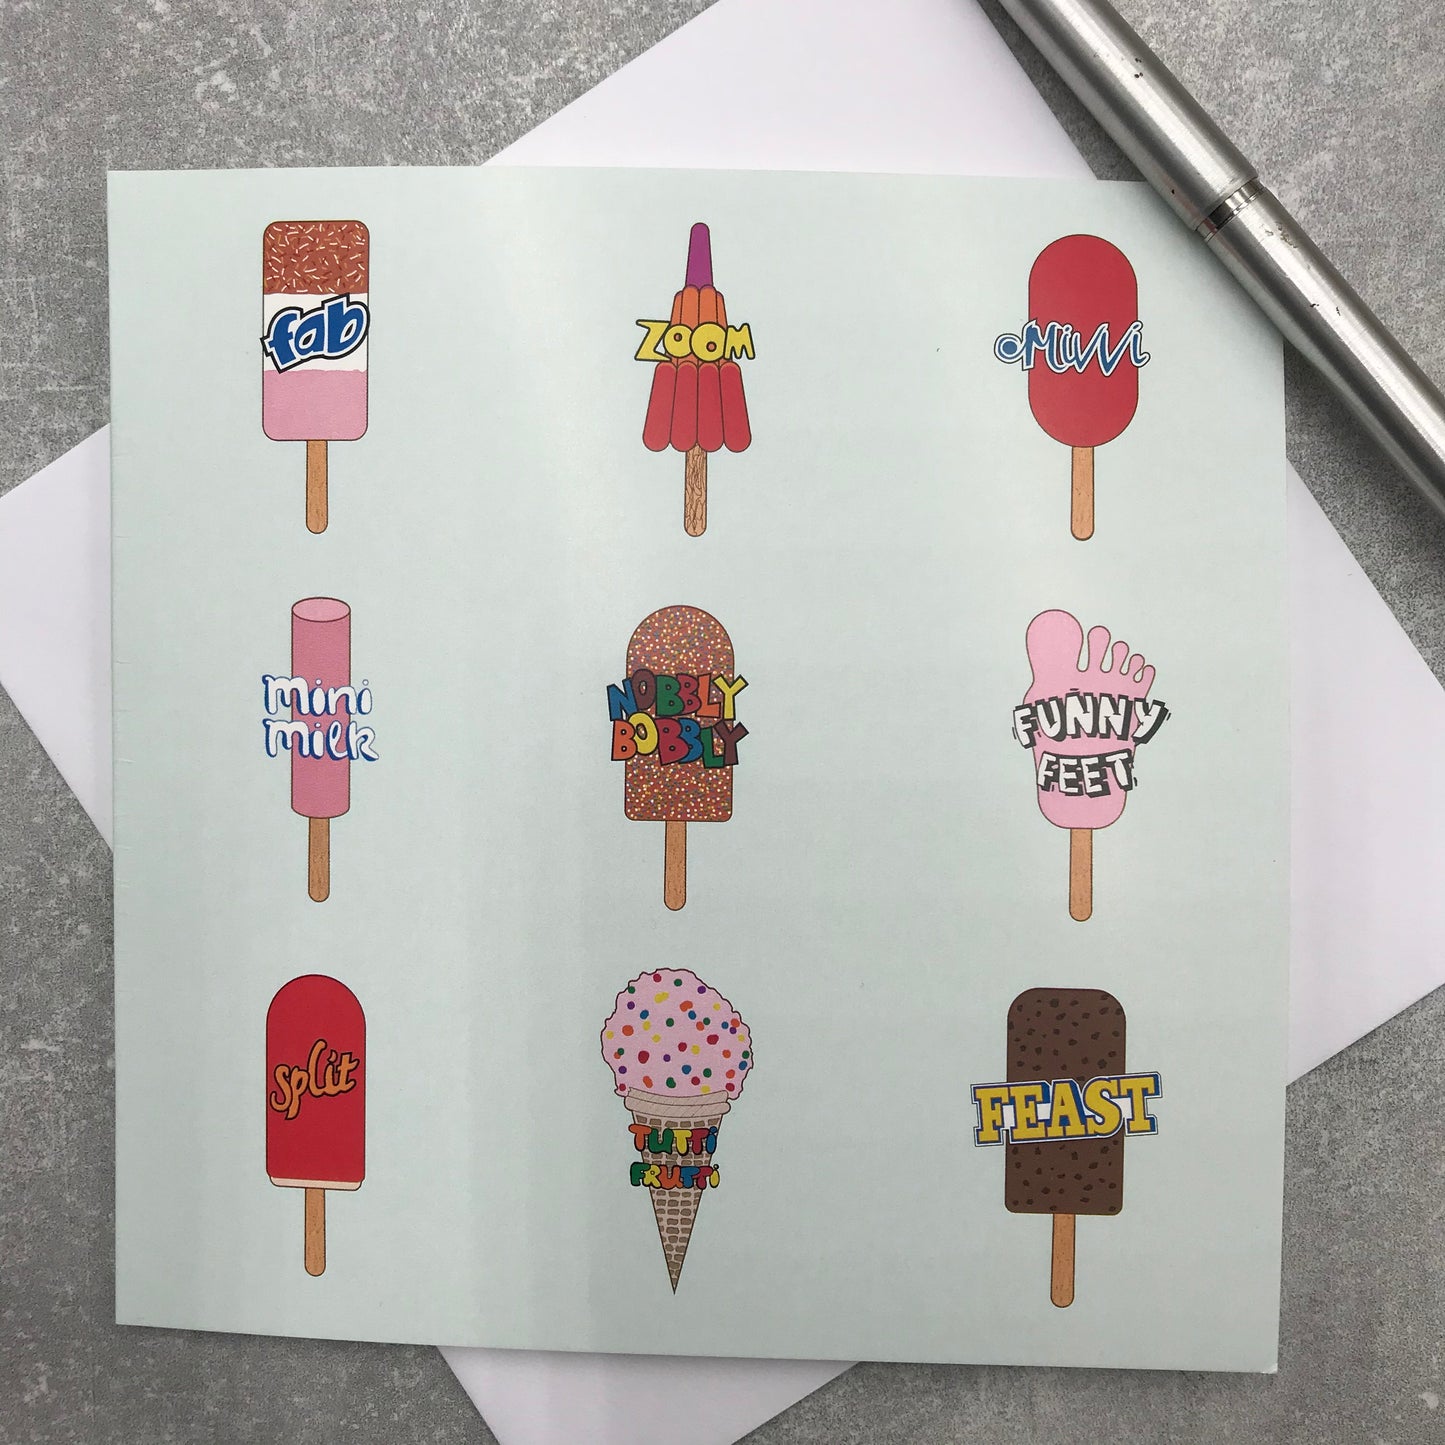 Retro Ice Lolly Card. Any Occasion